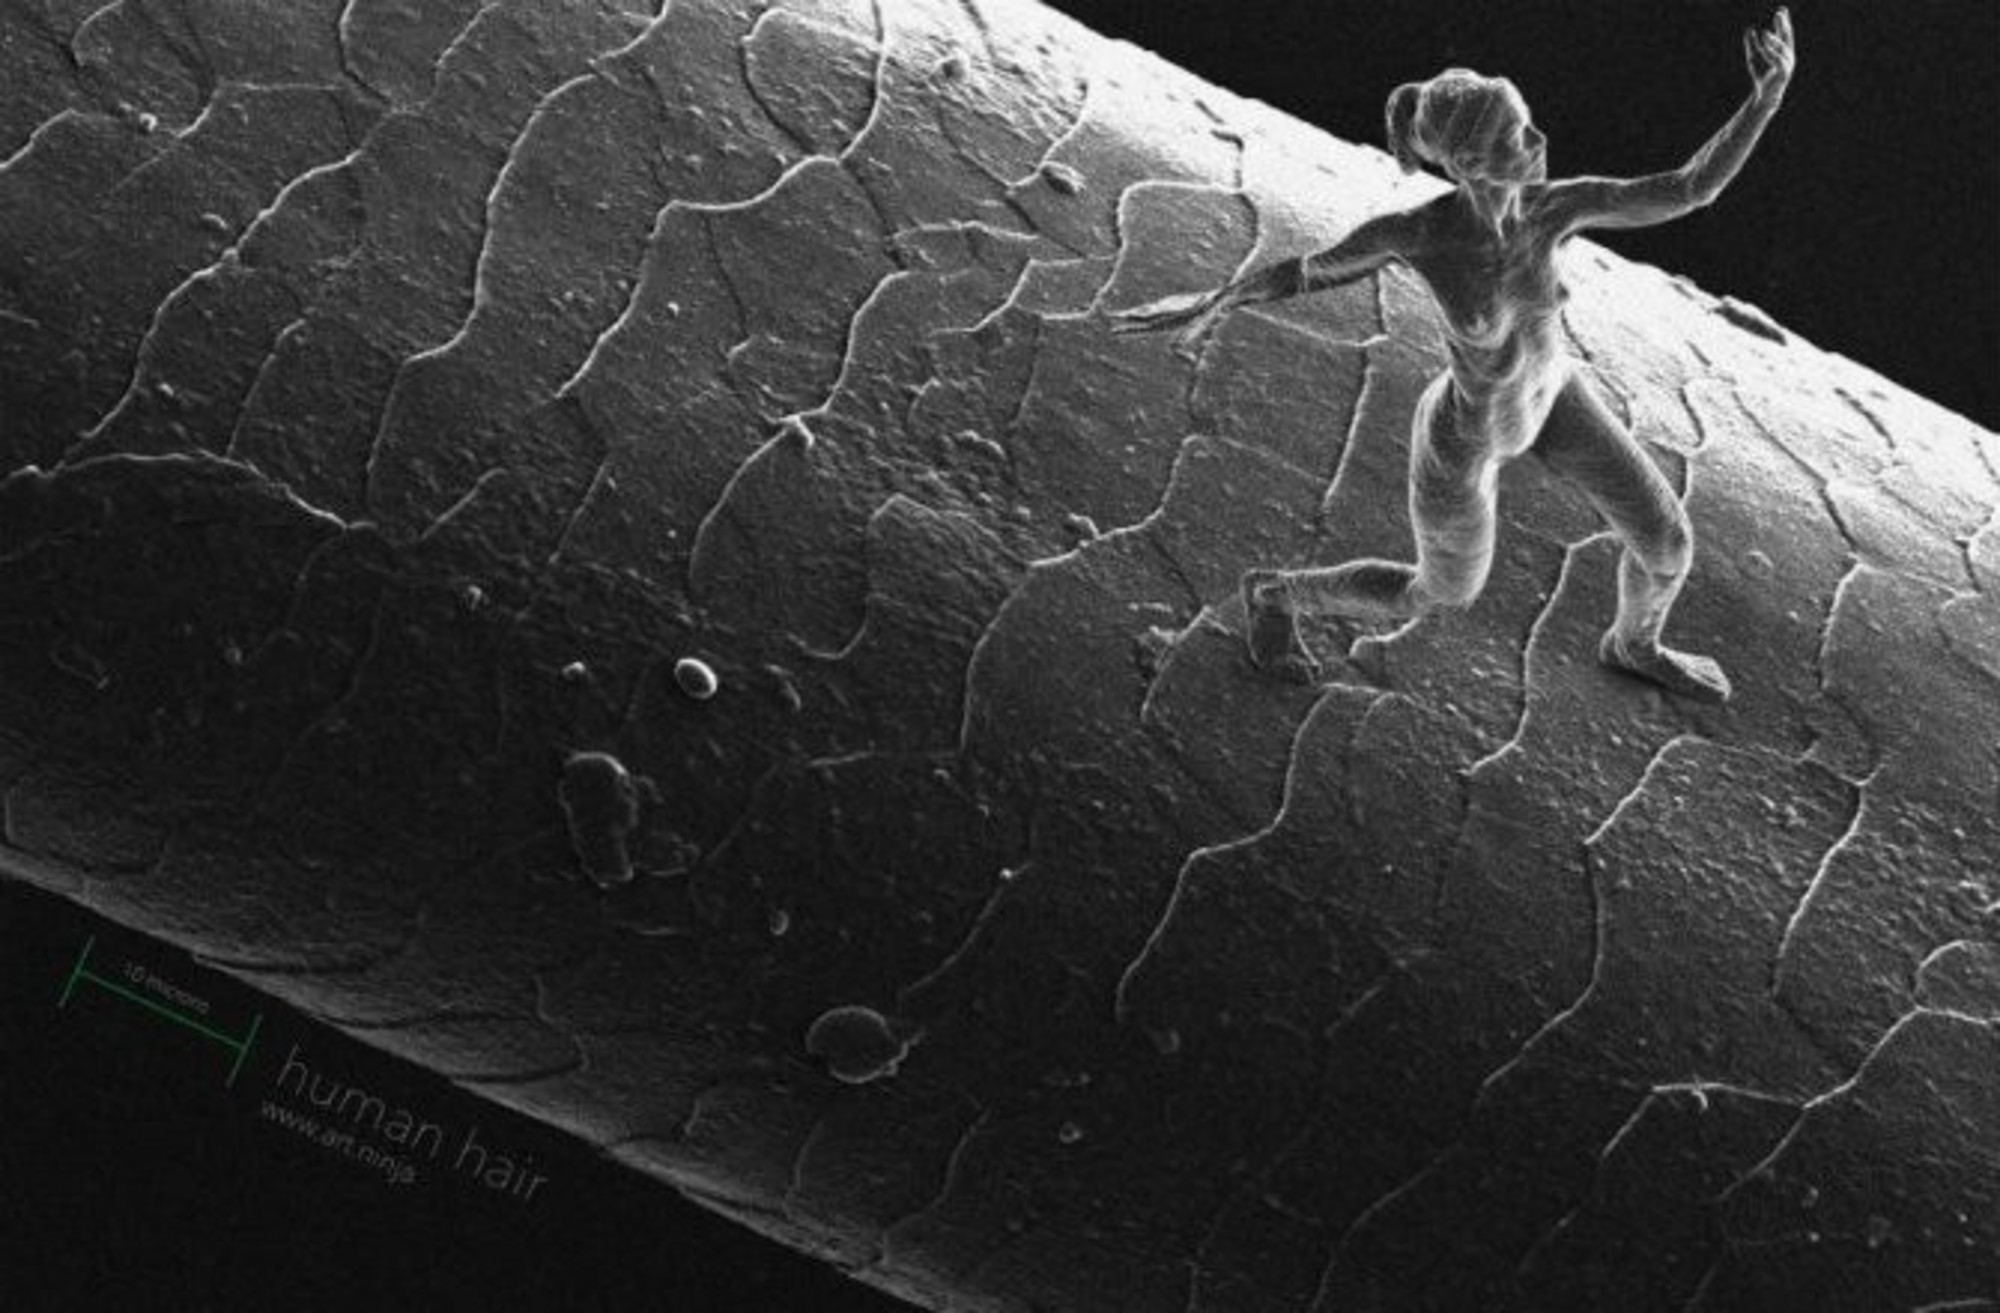  Artist and engineer  Jonty Hurwitz &nbsp;has created a series of nanoscale sculptures so small that they can only be viewed via electron microscope.  More info.  